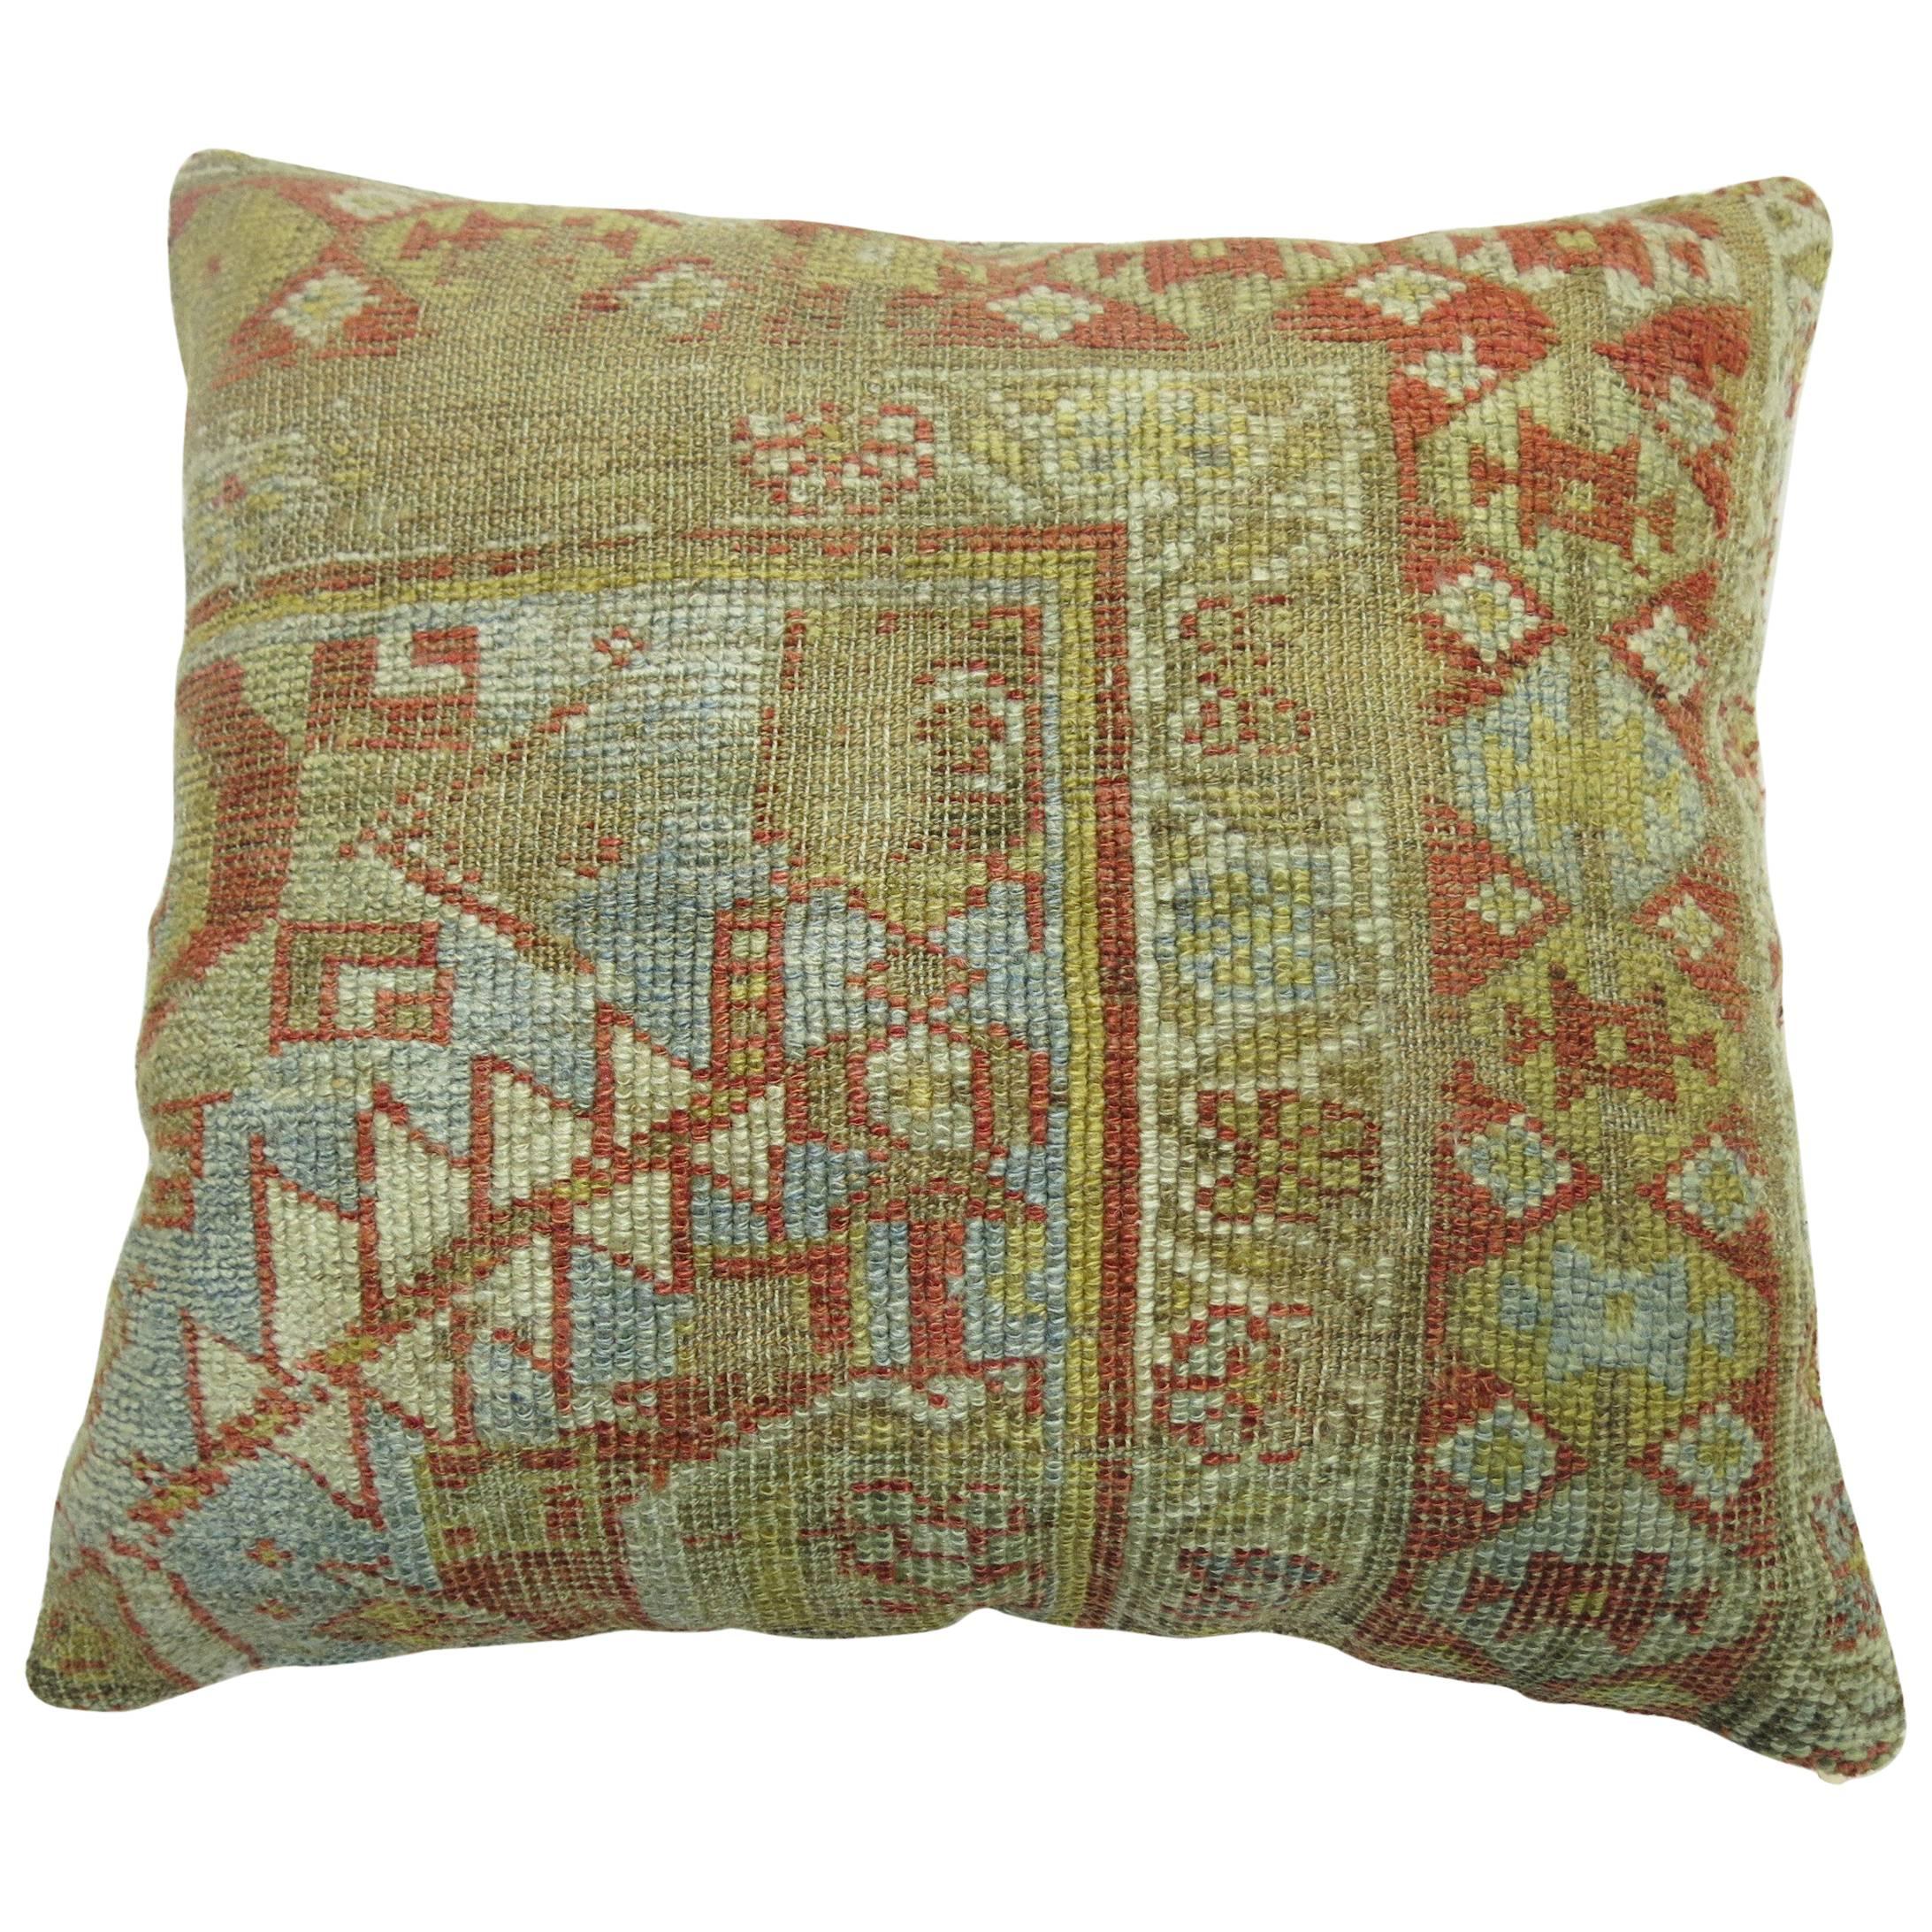 Pillow made from a Persian Malayer rug in dominant light blue and rust accents.

Measures: 19